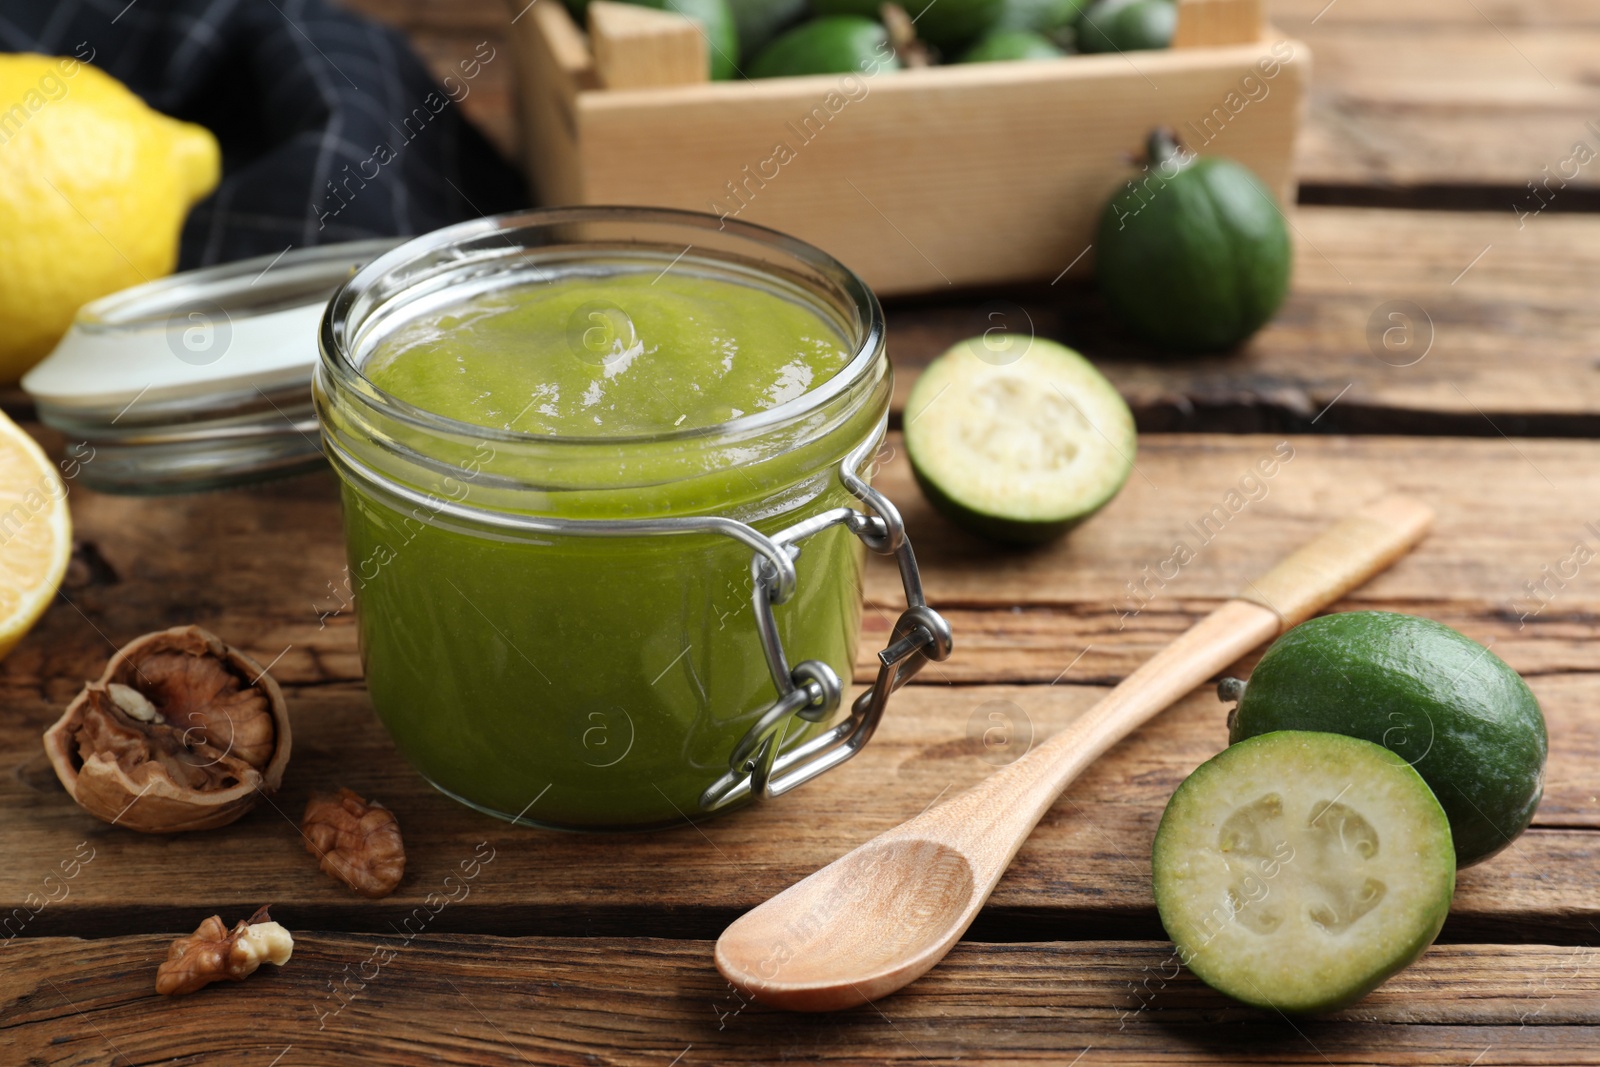 Photo of Feijoa jam in glass jar on wooden table